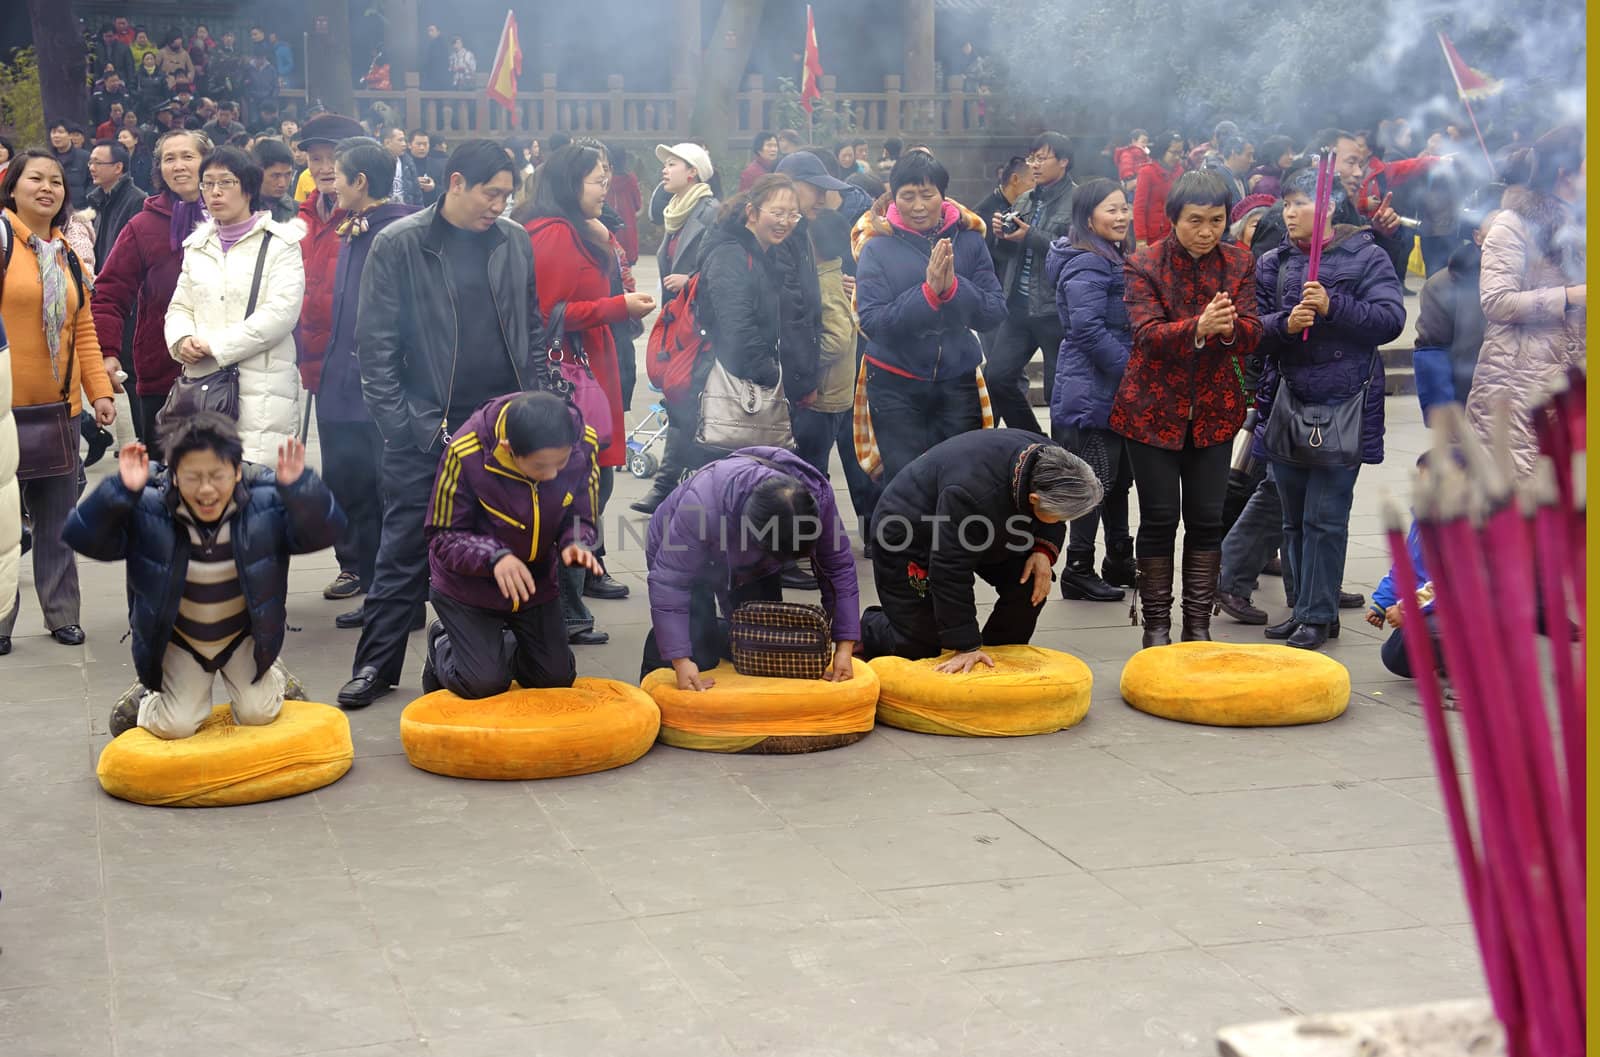 CHENGDU - FEB 5: People praying to Buddha in temple during chinese new year on Feb 5, 2011 in Chengdu, China.Many people want to relieve their worries and difficulties by burning incense and praying to Buddha during festivals.It's part of the important traditional custom in China.